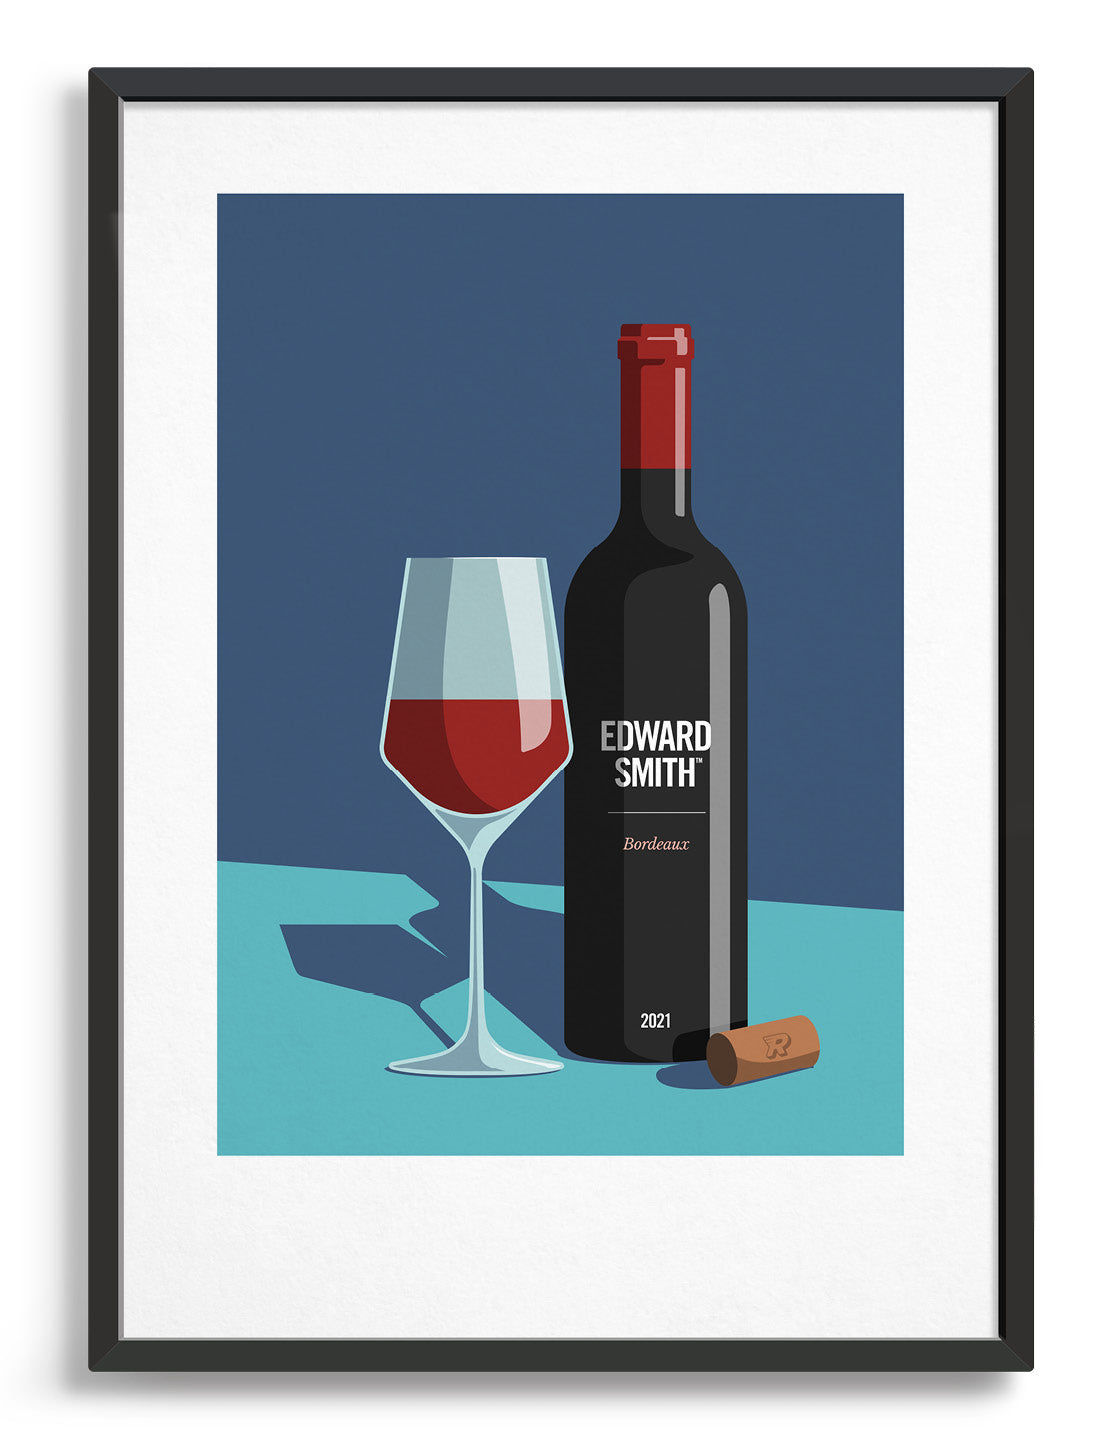 Minimal art print showing a wine glass half filled with red wine stood next to a bottle with white text. A cork lays on the side. Print has a dark blue background in the top two thirds and a turquoise background for the bottom third